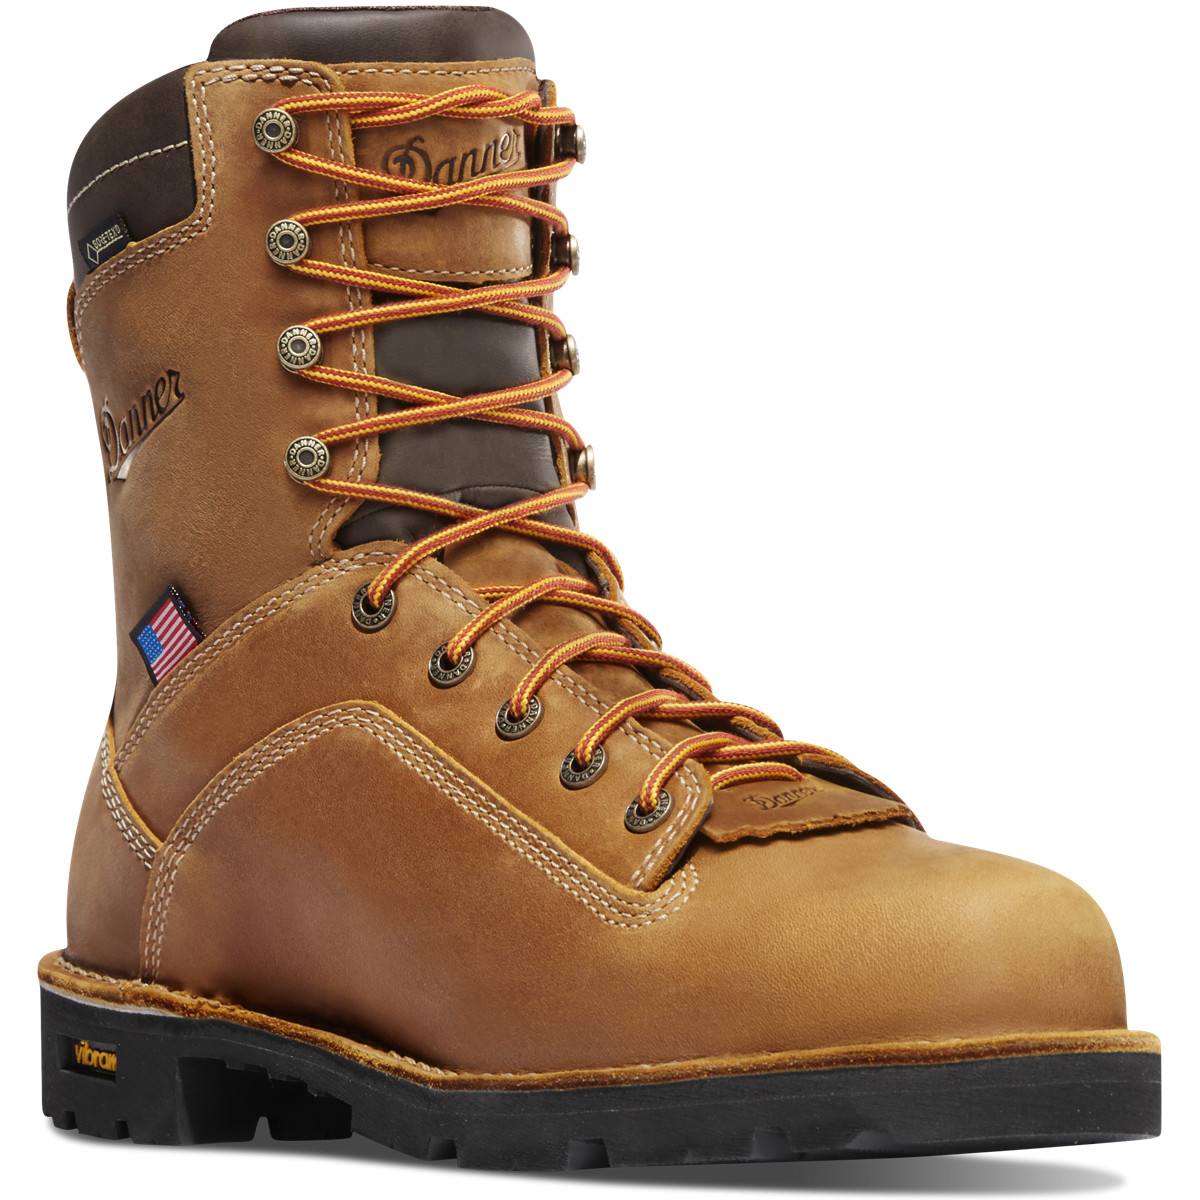 Danner Quarry USA Boots